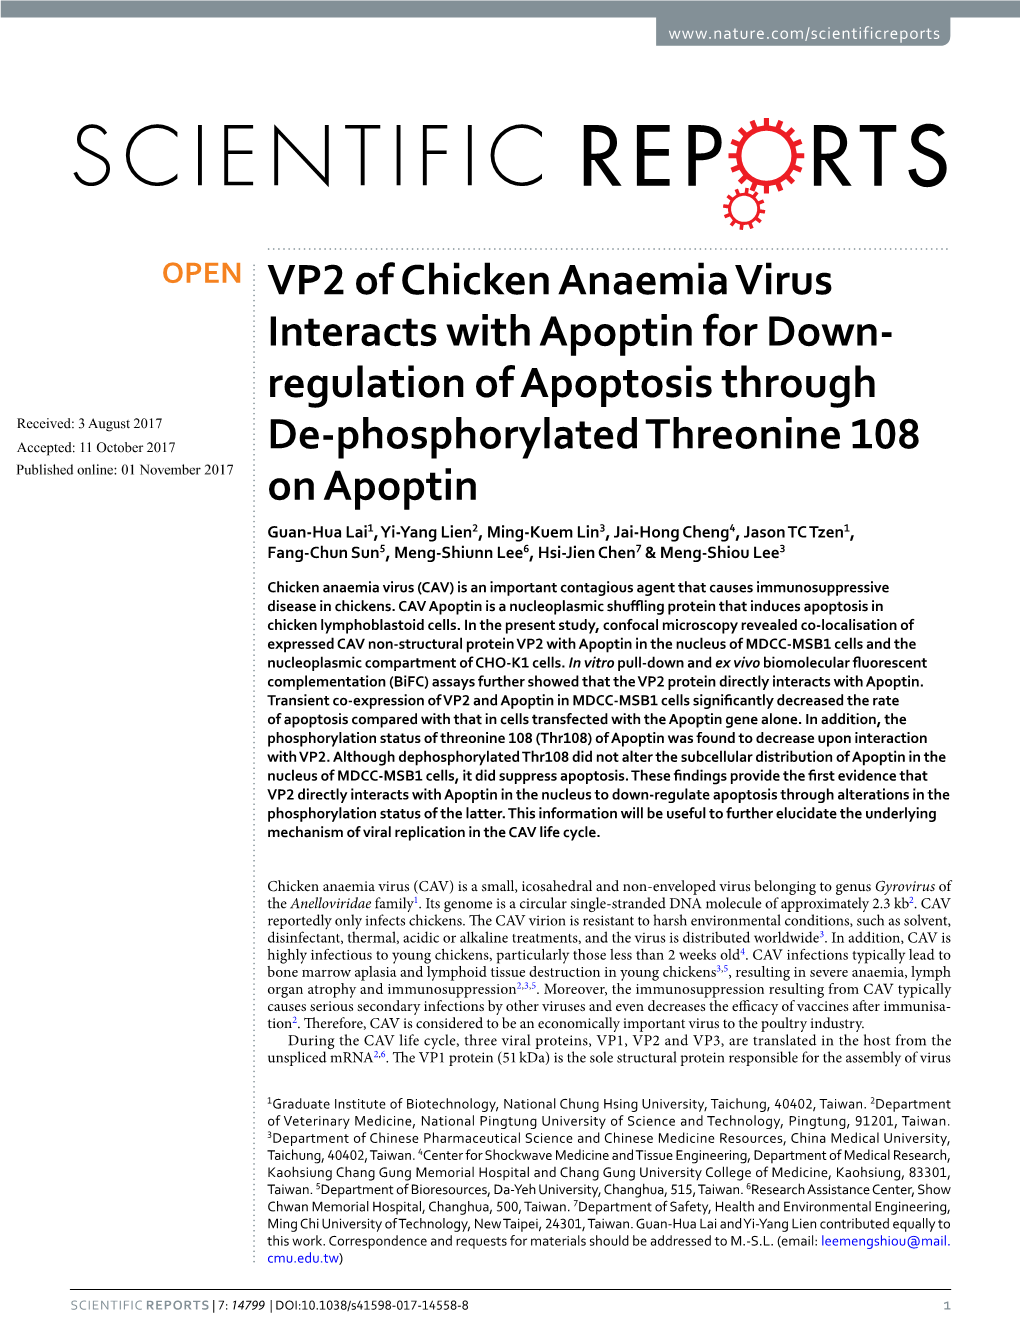 VP2 of Chicken Anaemia Virus Interacts with Apoptin for Down